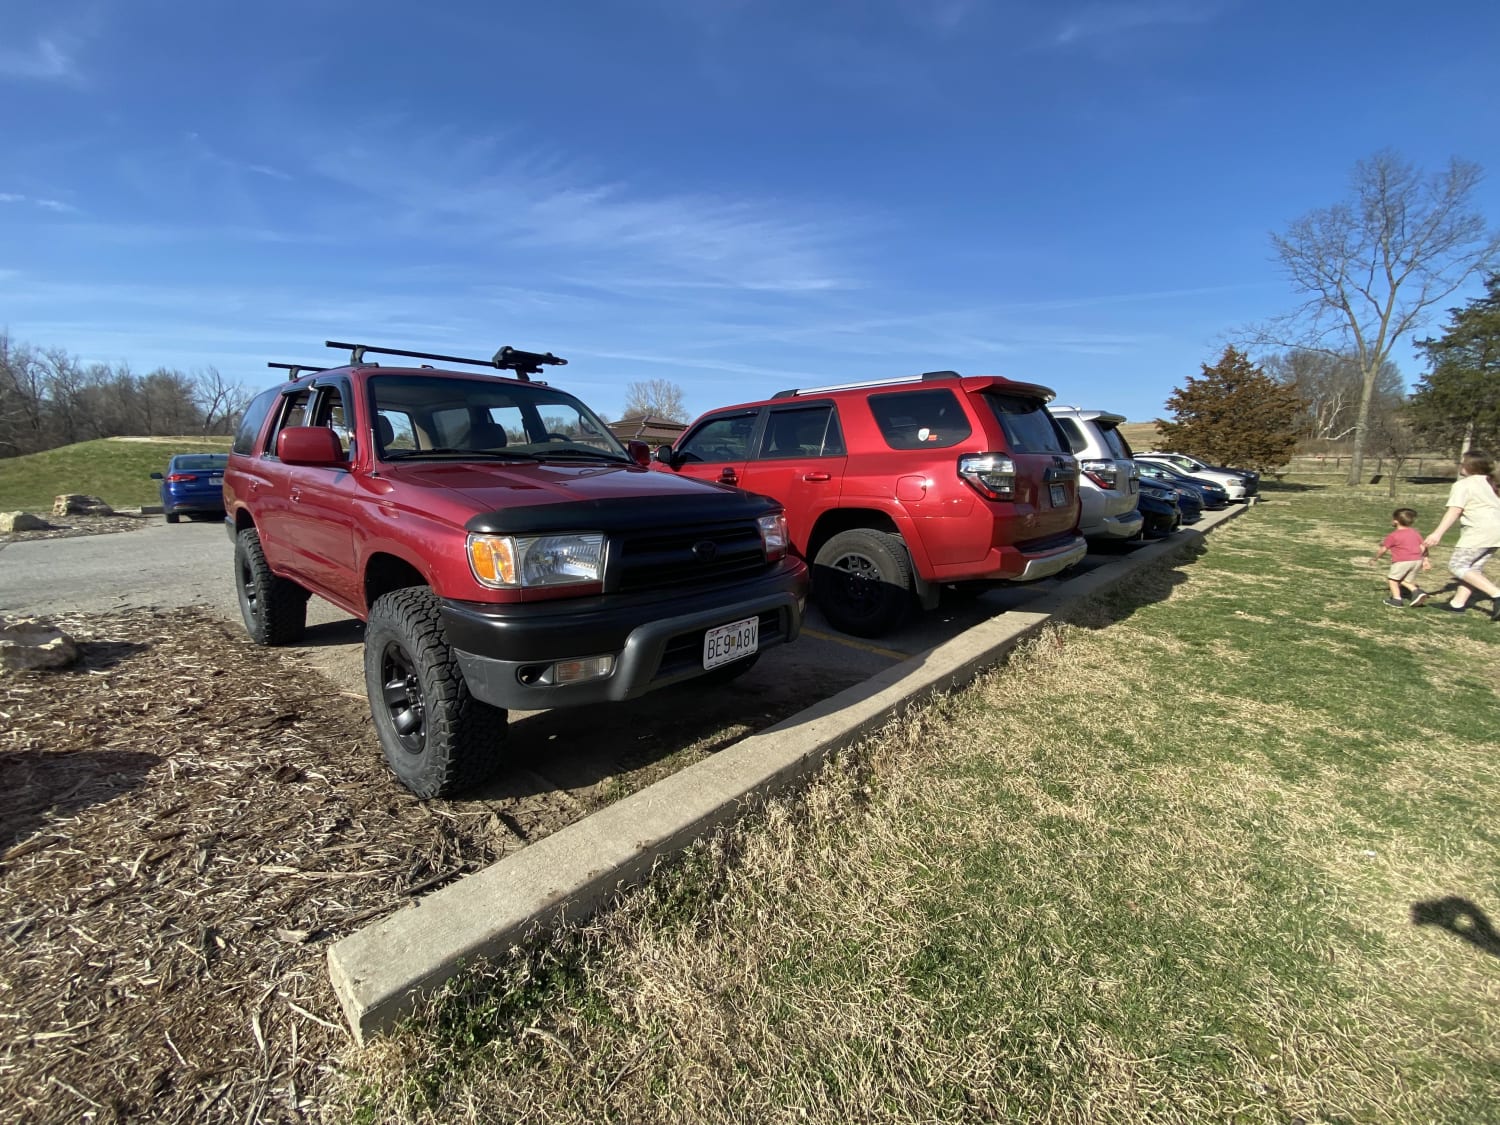 4Runner ❤️! Harmony bends disc golf course today.